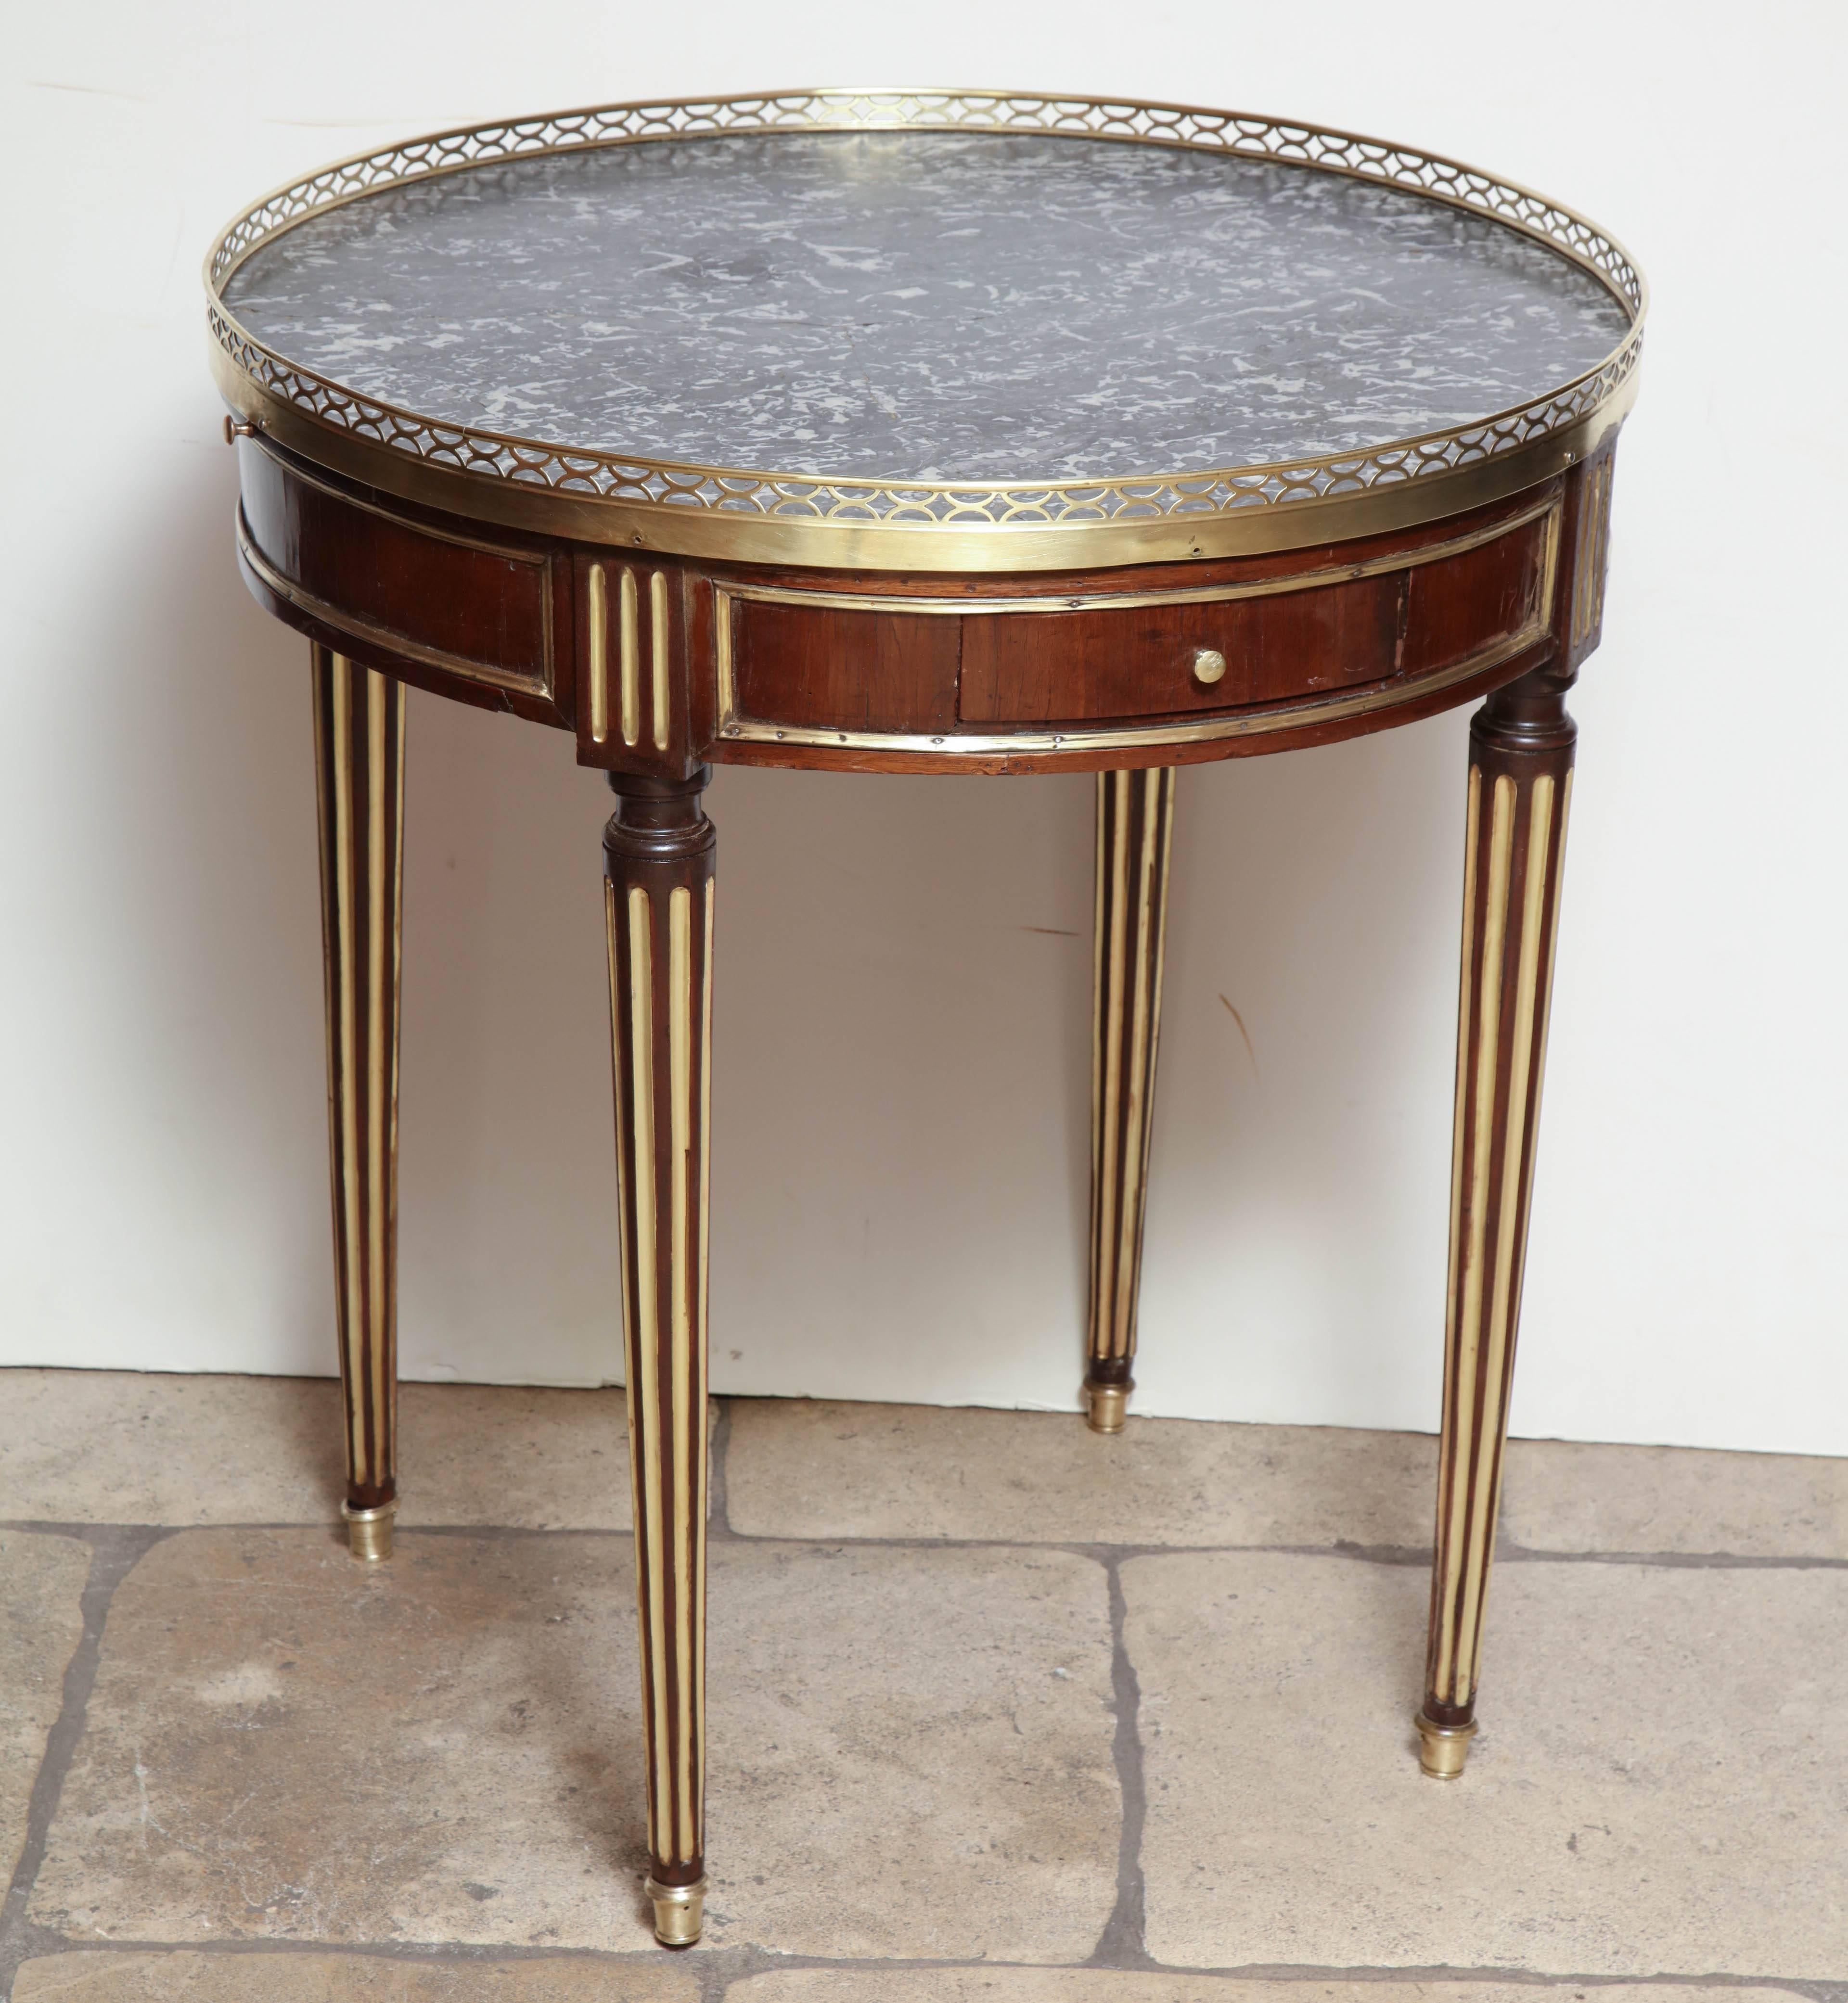 French Louis XVI marble-top Bouillotte table with a pierced bronze gallery, brass and gilded trim on bronze feet.